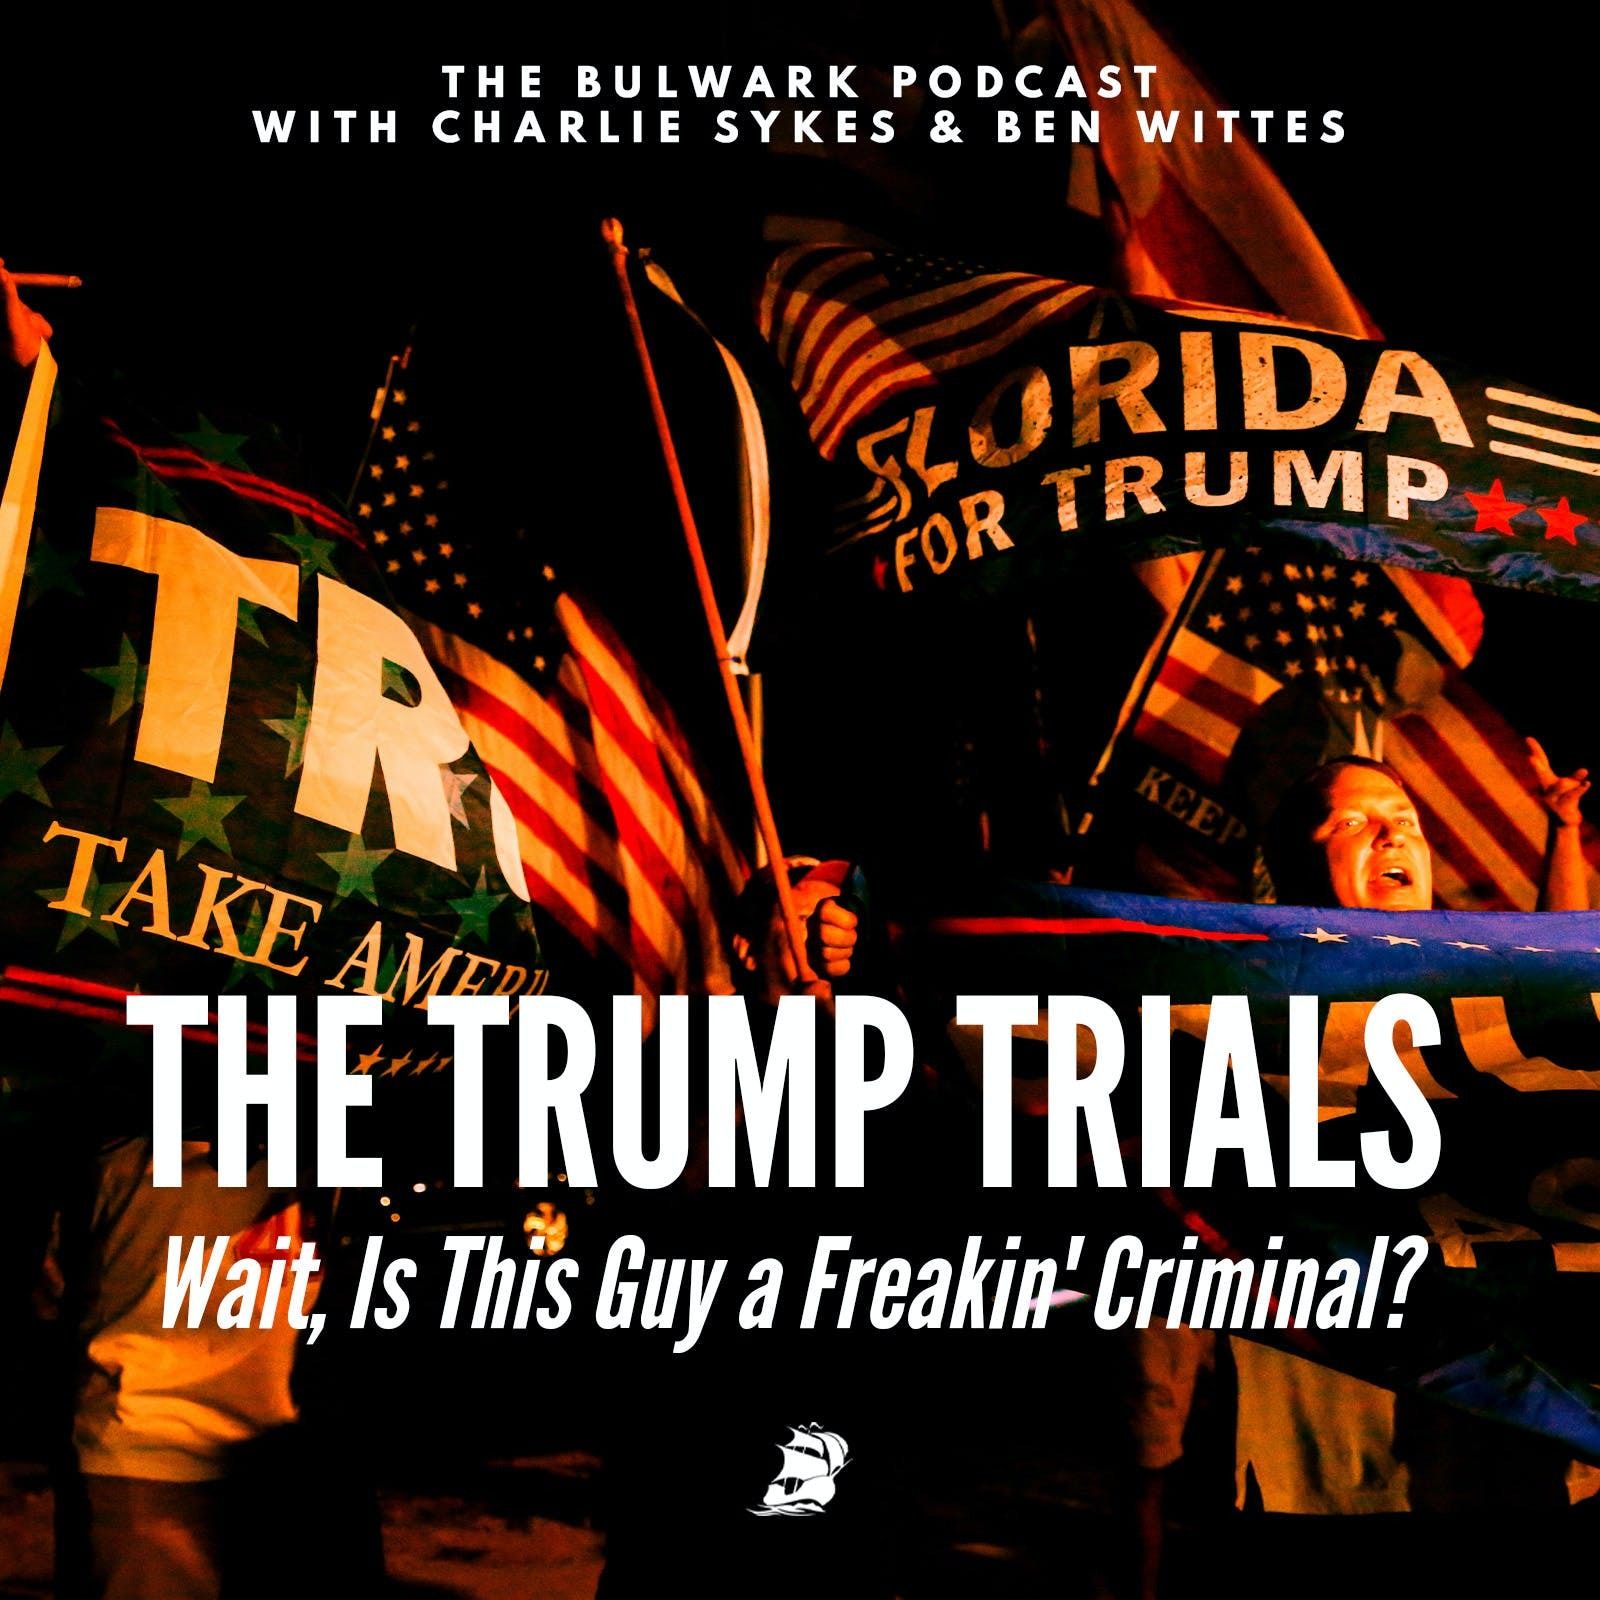           Wait, Is This Guy a Freakin' Criminal? by The Bulwark Podcast